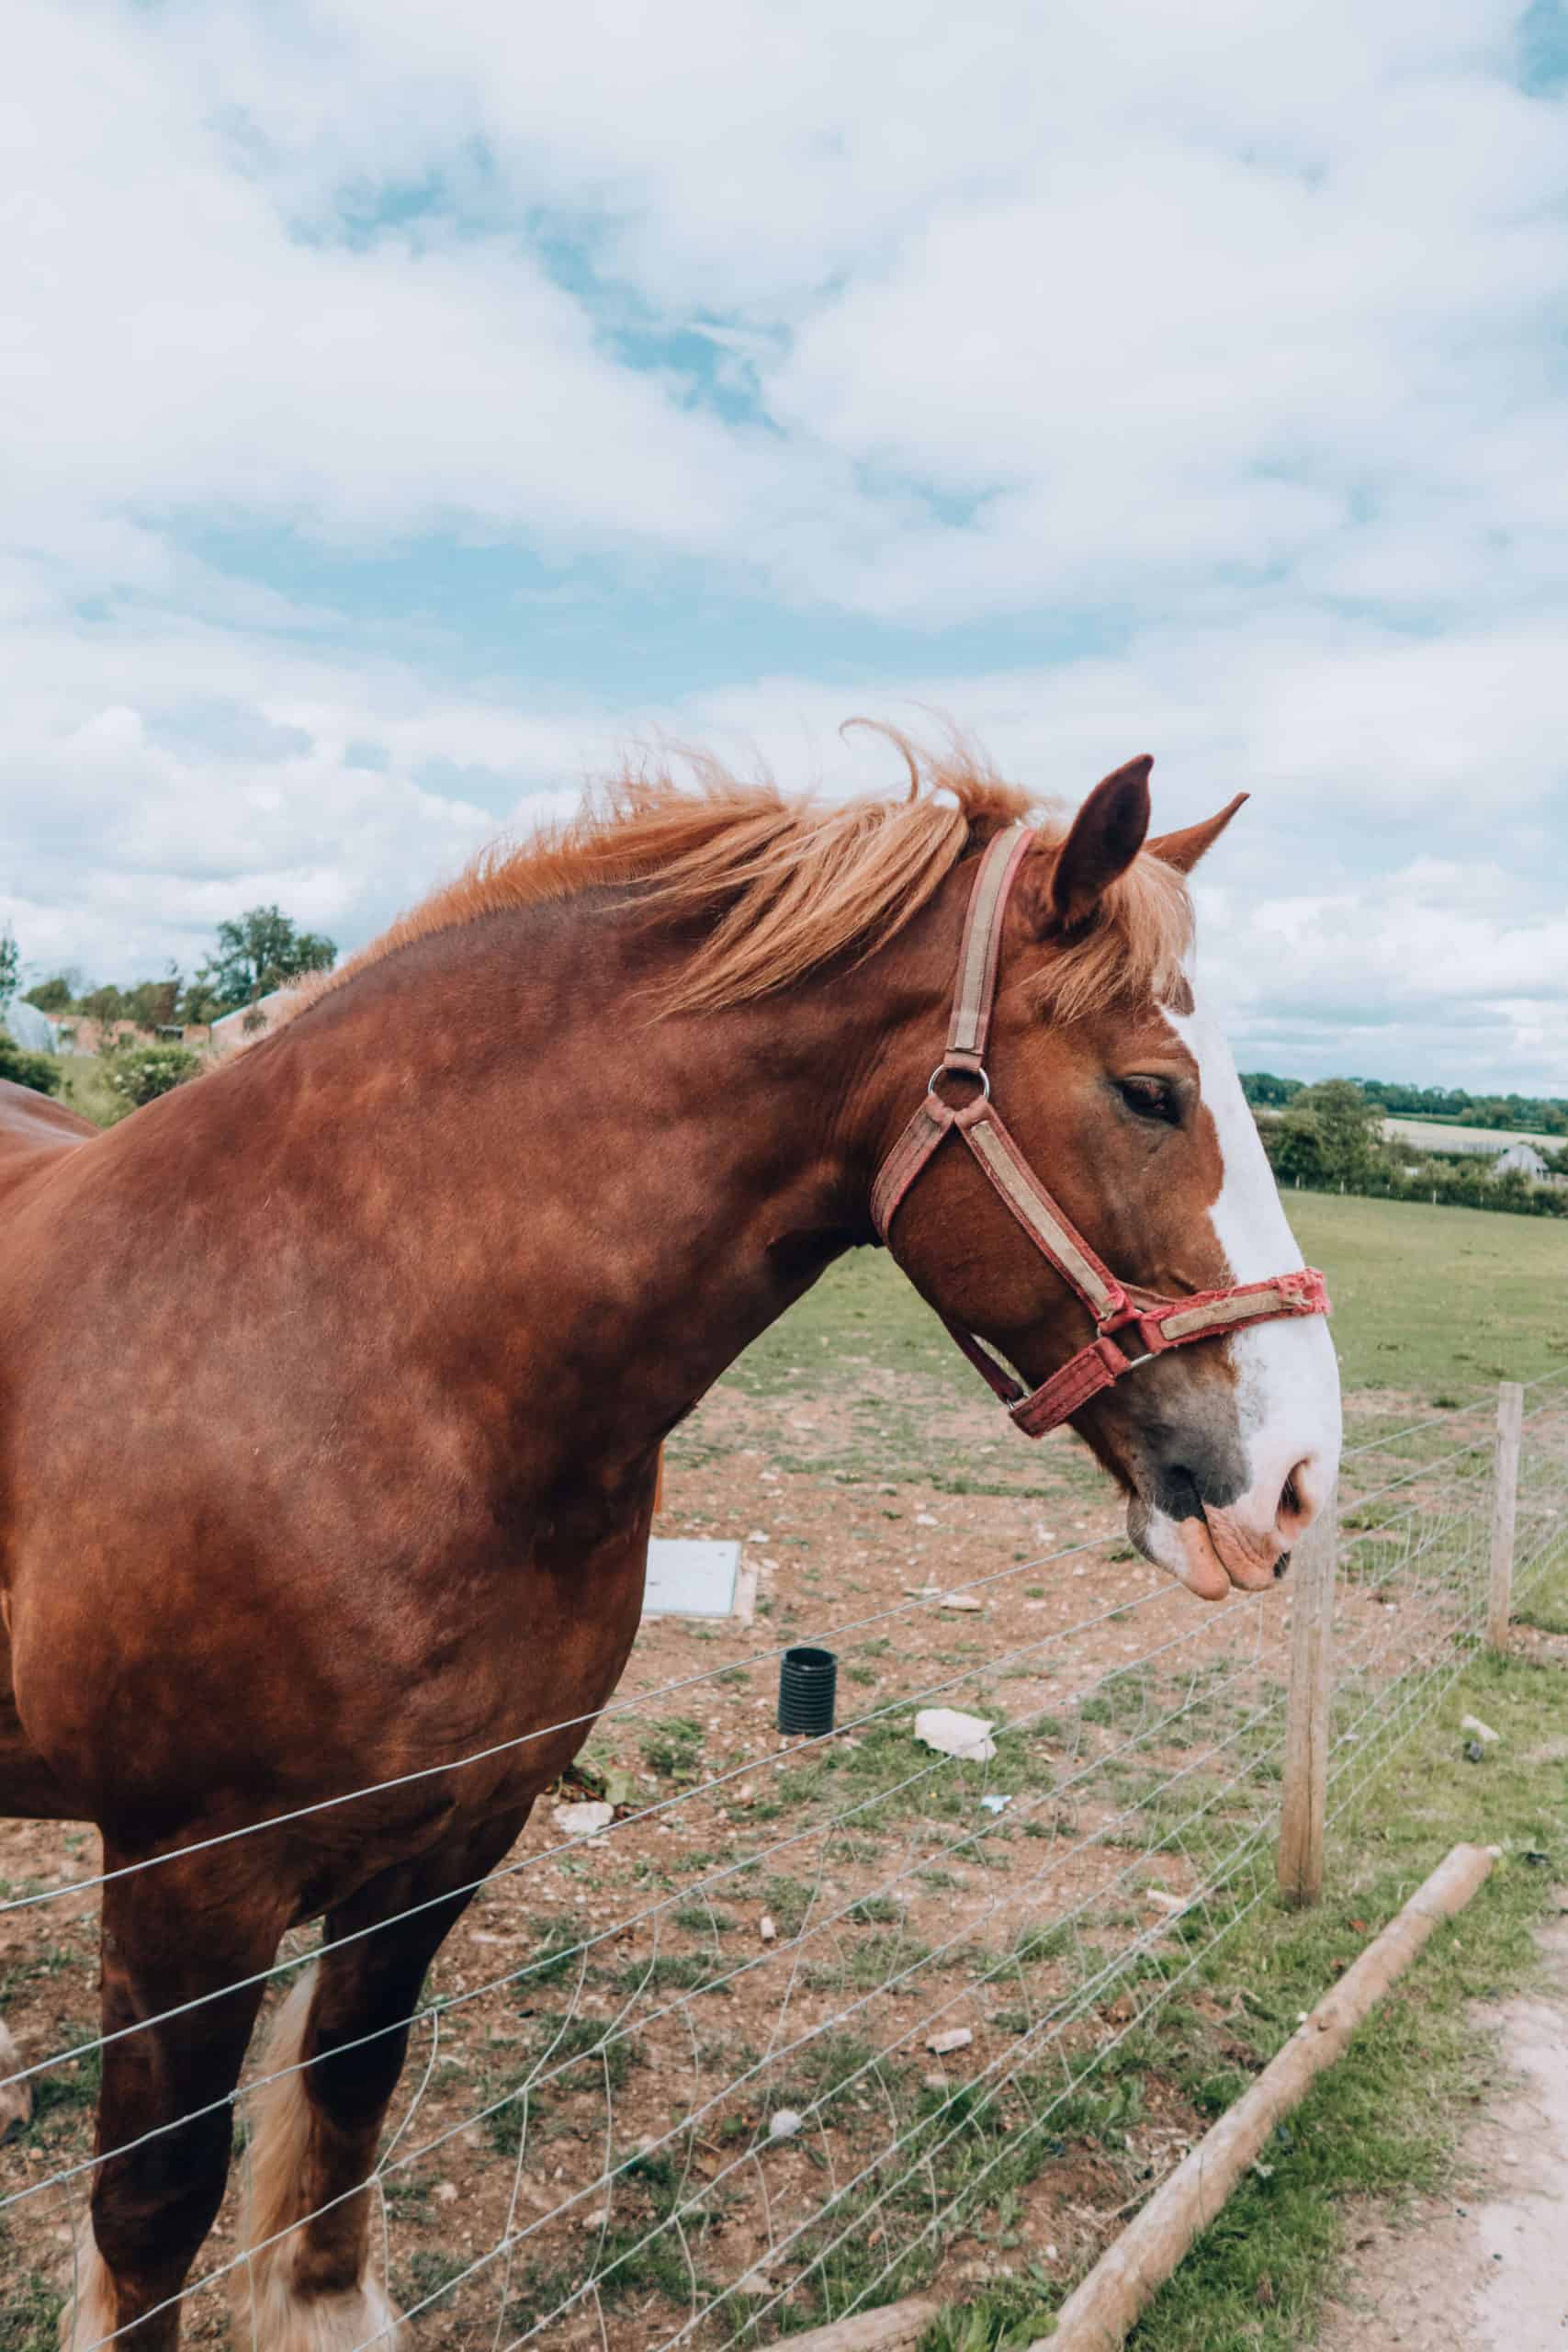 Horse in the English Countryside | The Cotswolds in 20 Photos